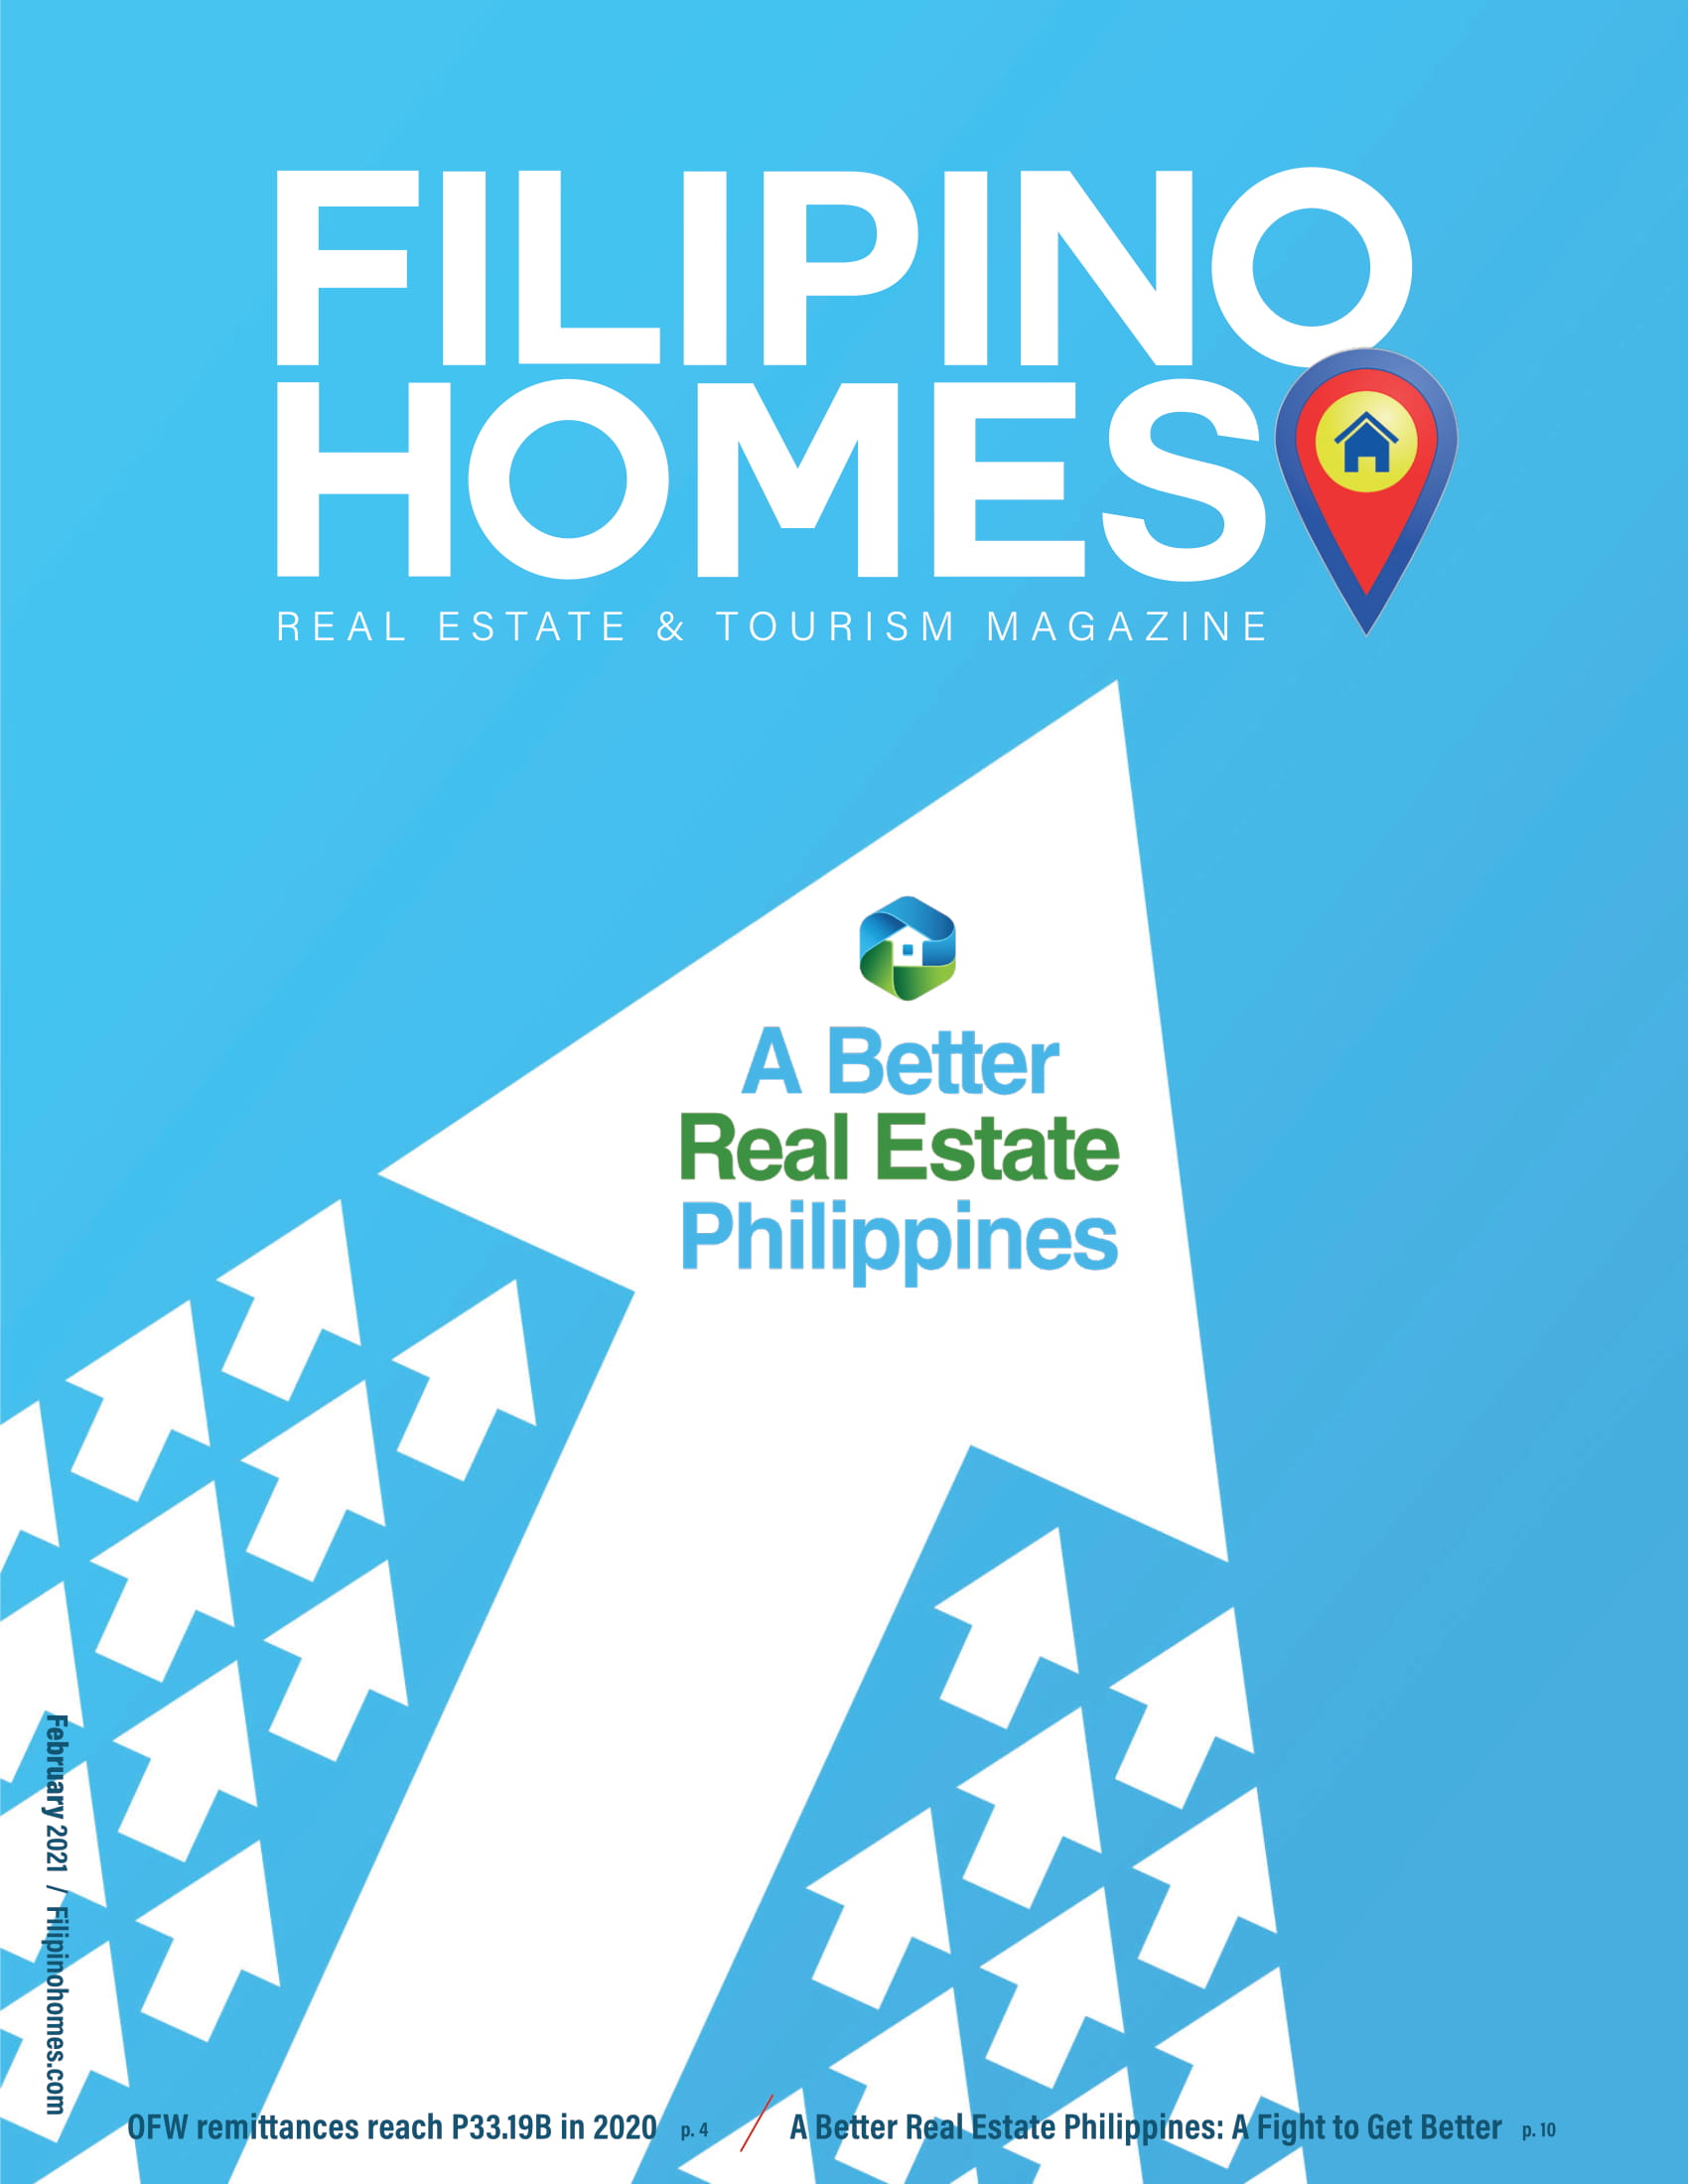 A Better Real Estate Philippines